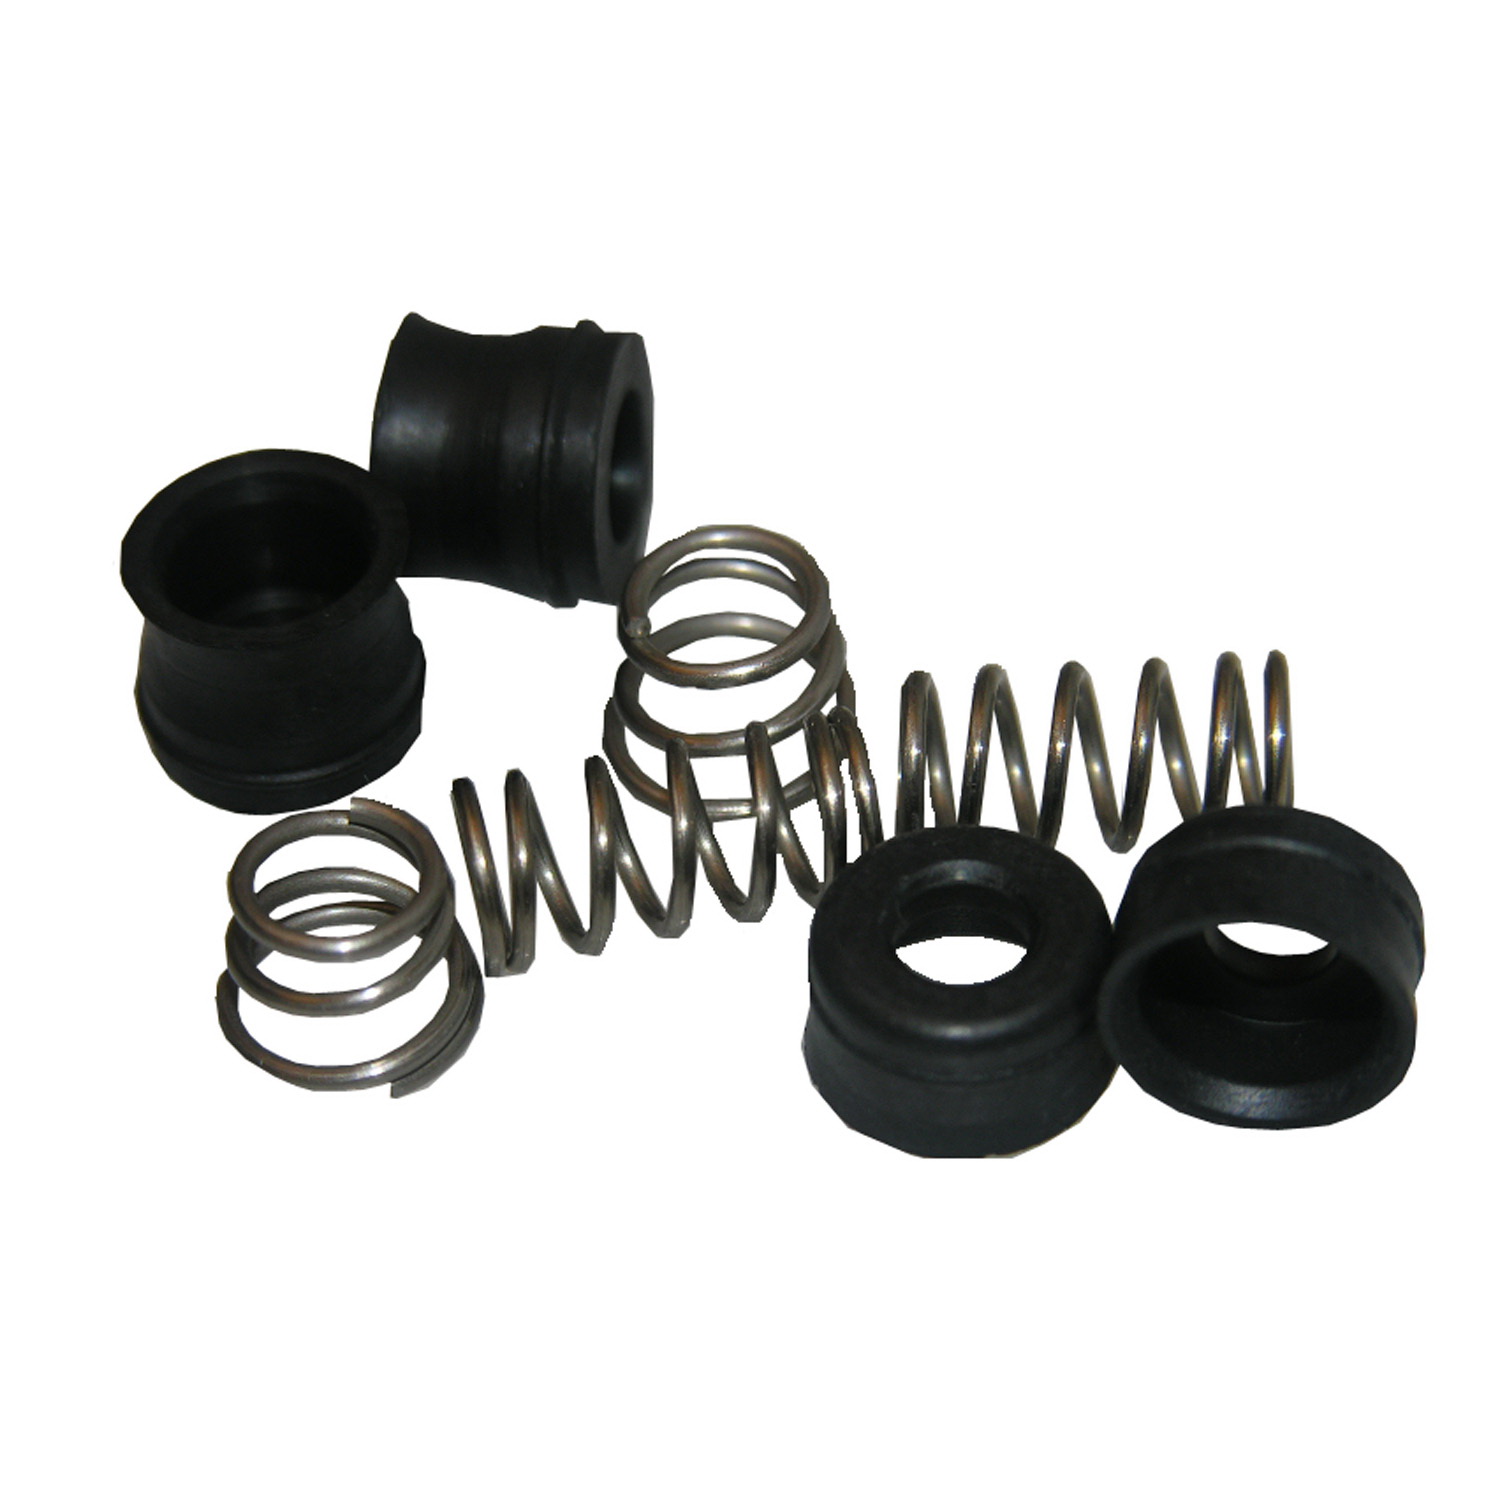 Lasco 0-3021 Combo Seat and Spring Kit, For: Delta Faucets